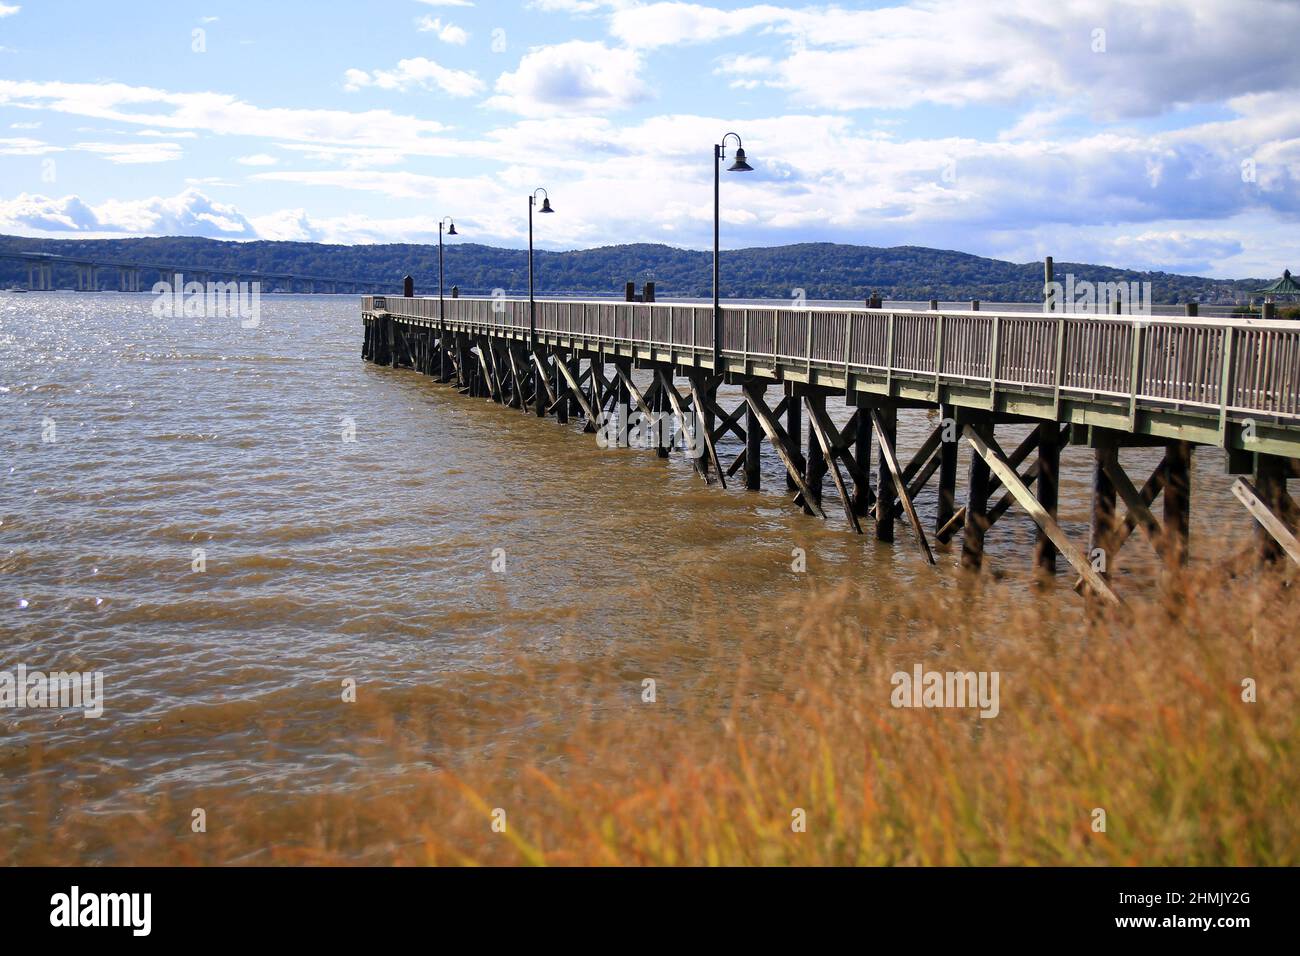 The wooden pier emerging from the fall bushes on the river during a sunny and clouded day Stock Photo